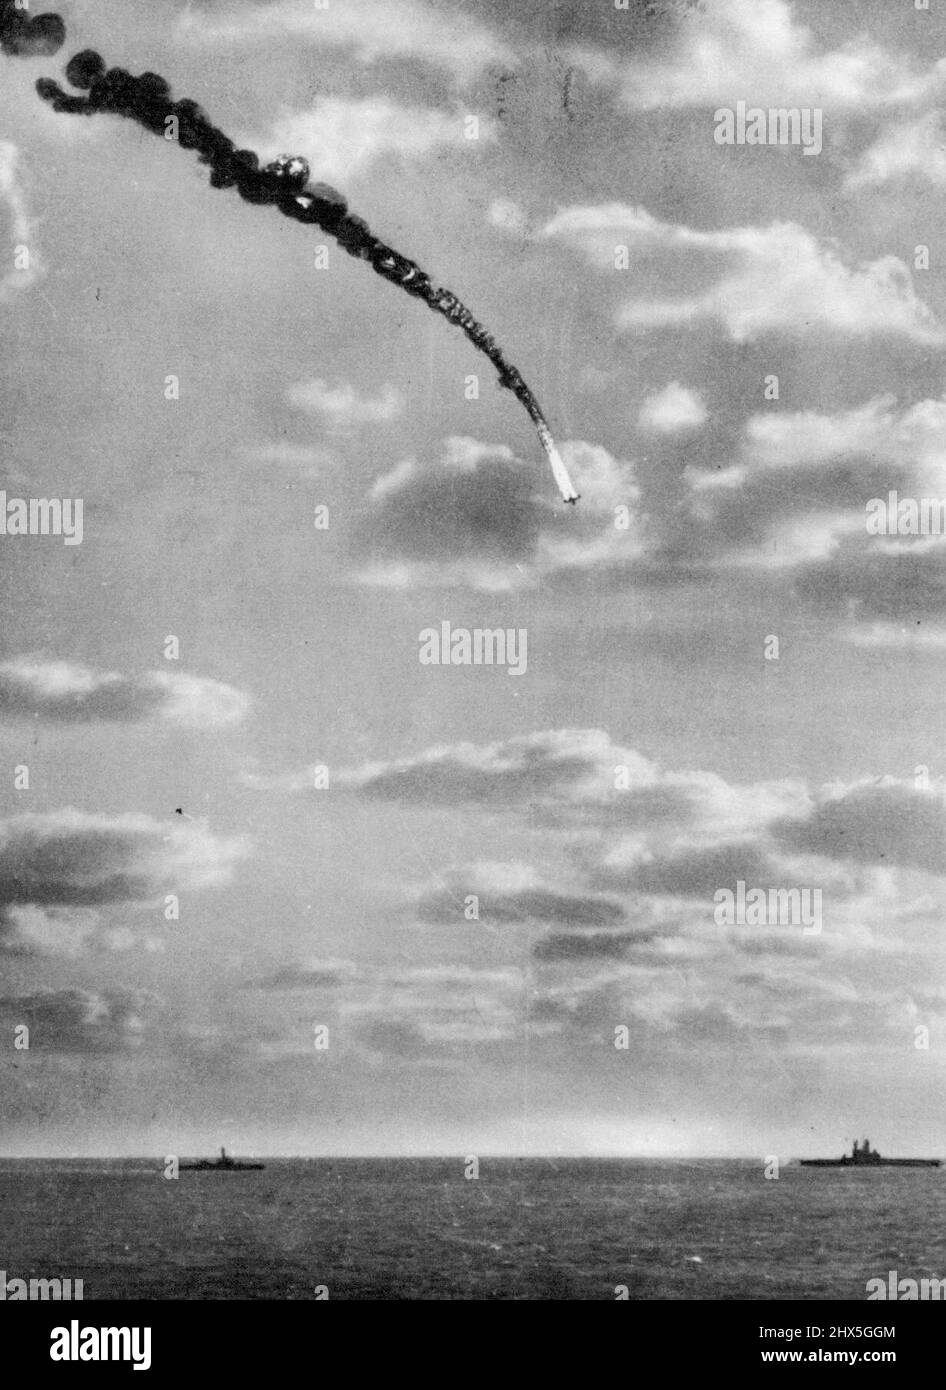 Flaming Jap Plane Plunges in Pacific set ablaze by anti-aircraft fire from a U.S. Essex class carrier, this Jap Bomber leaves a trail of smoke and flame as it plungs toward the Pacific off Kyushu. An Iowa class battleship (right) and a destroyer, part of a U.S. Task Force, are at bottom. May 14, 1945. (Photo by Associated Press Photo). Stock Photo